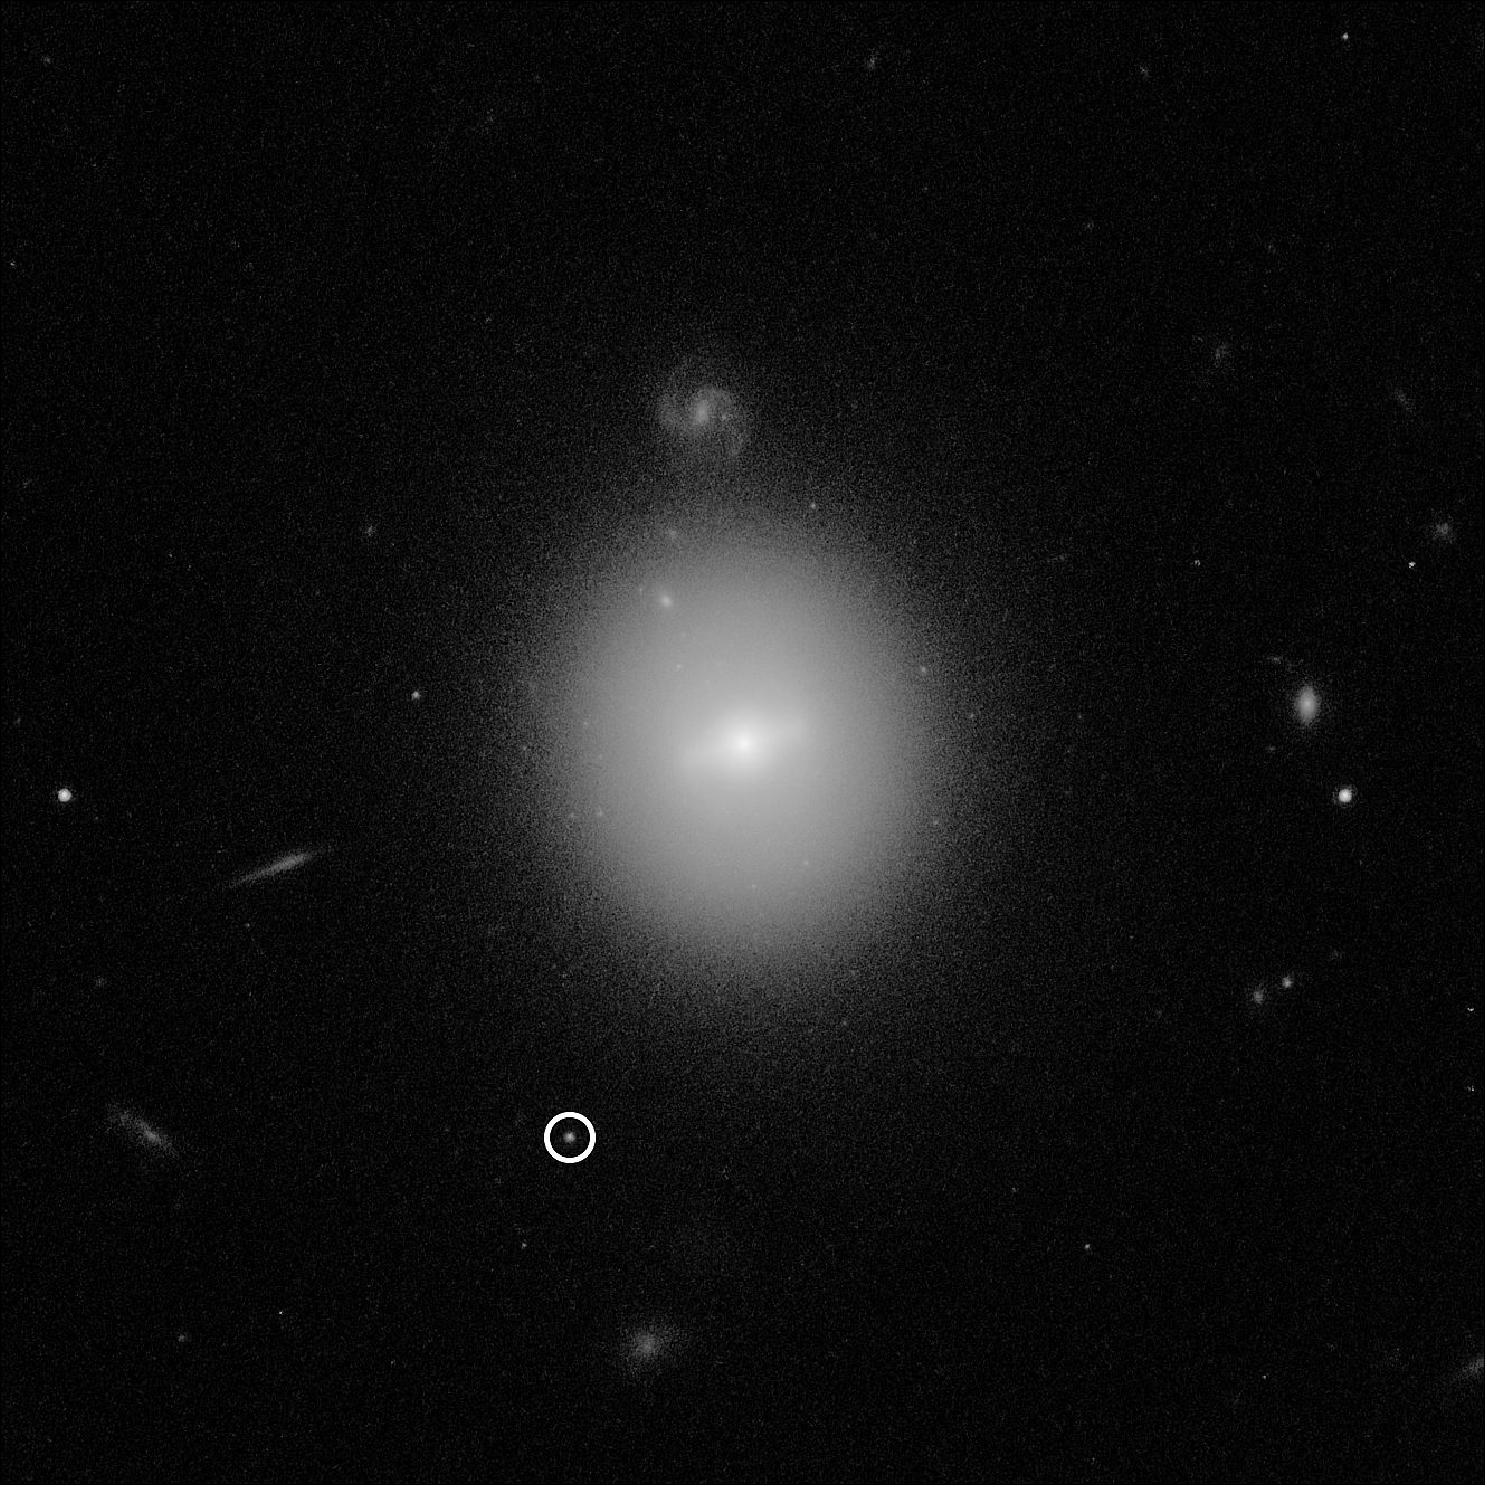 Figure 81: This Hubble Space Telescope image identified the location of an intermediate-mass black hole, weighing 50,000 times the mass of our Sun (making it much smaller than supermassive black holes found in the centers of galaxies). The black hole, named 3XMM J215022.4-055108, is indicated by the white circle. The elusive type of black hole was first identified in a burst of telltale X-rays emitted by hot gas from a star as it was captured and destroyed by the black hole. Hubble was needed to pinpoint the black hole's location in visible light. Hubble's deep, high-resolution imaging shows that the black hole resides inside a dense cluster of stars that is far beyond our Milky Way galaxy. The star cluster is in the vicinity of the galaxy at the center of the image. Much smaller-looking background galaxies appear sprinkled around the image, including a face-on spiral just above the central foreground galaxy. This photo was taken with Hubble's Advanced Camera for Surveys [image credits: NASA, ESA and D. Lin (University of New Hampshire)]